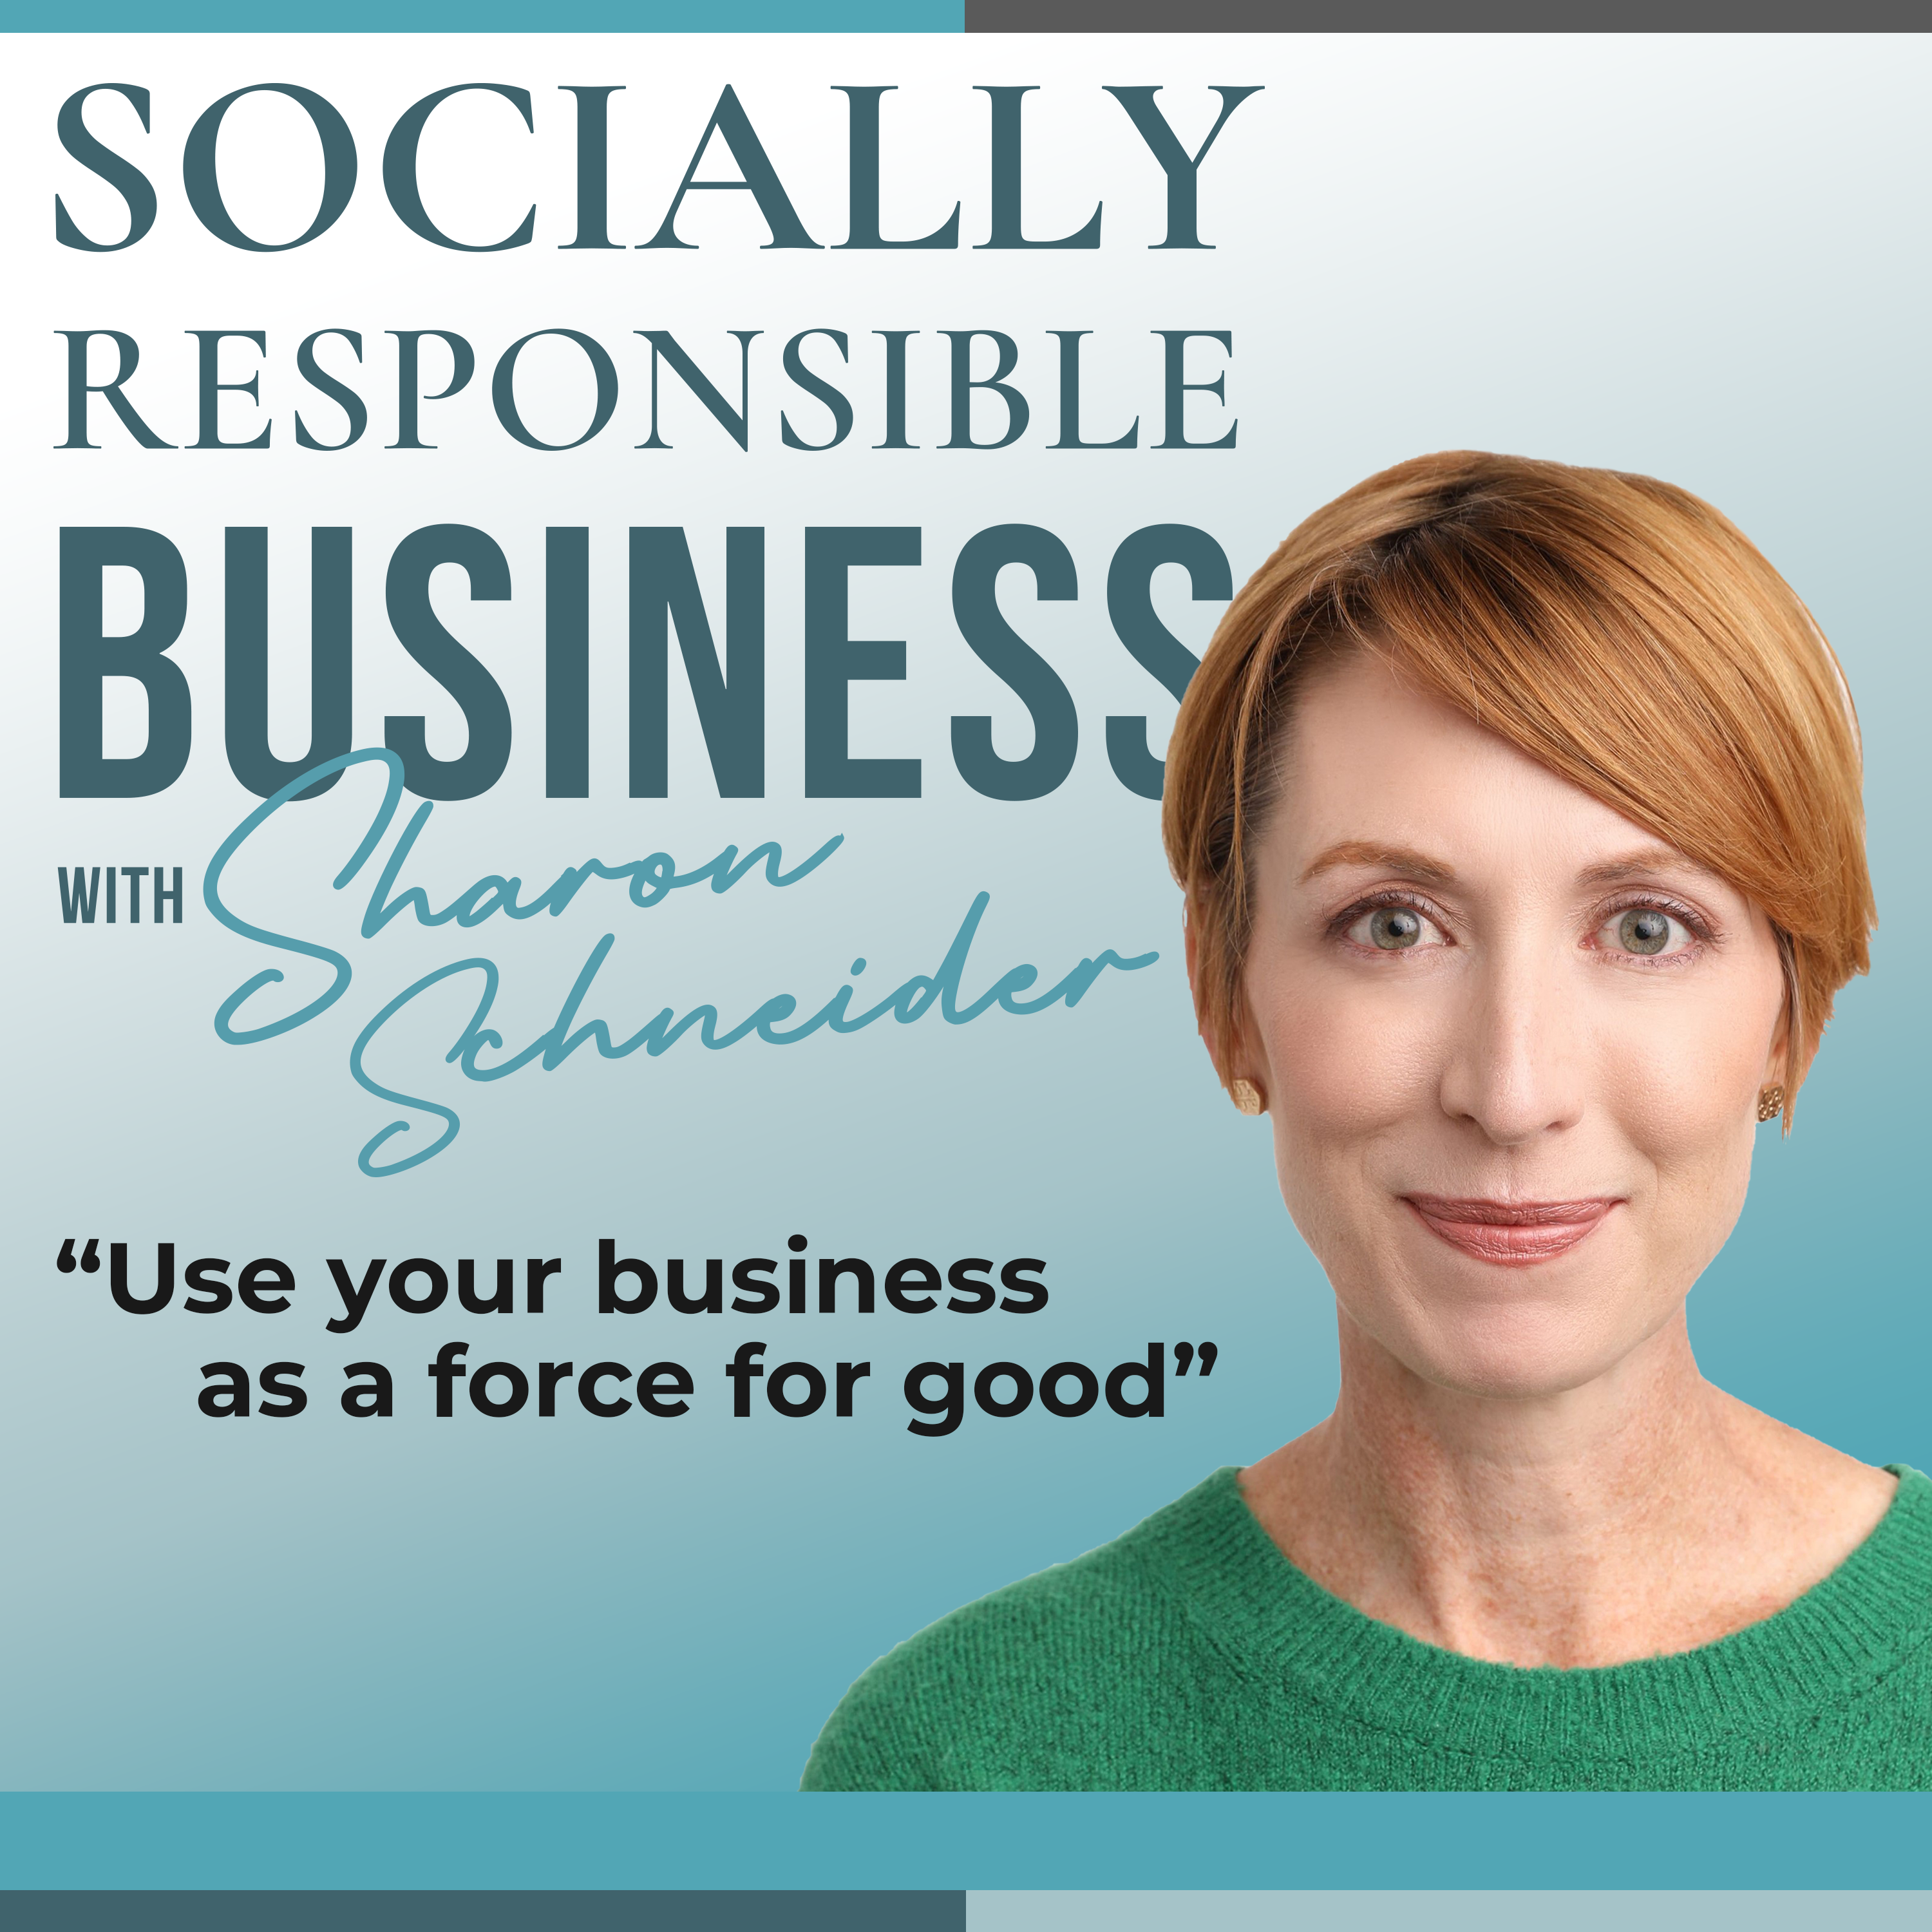 Socially-Responsible Business